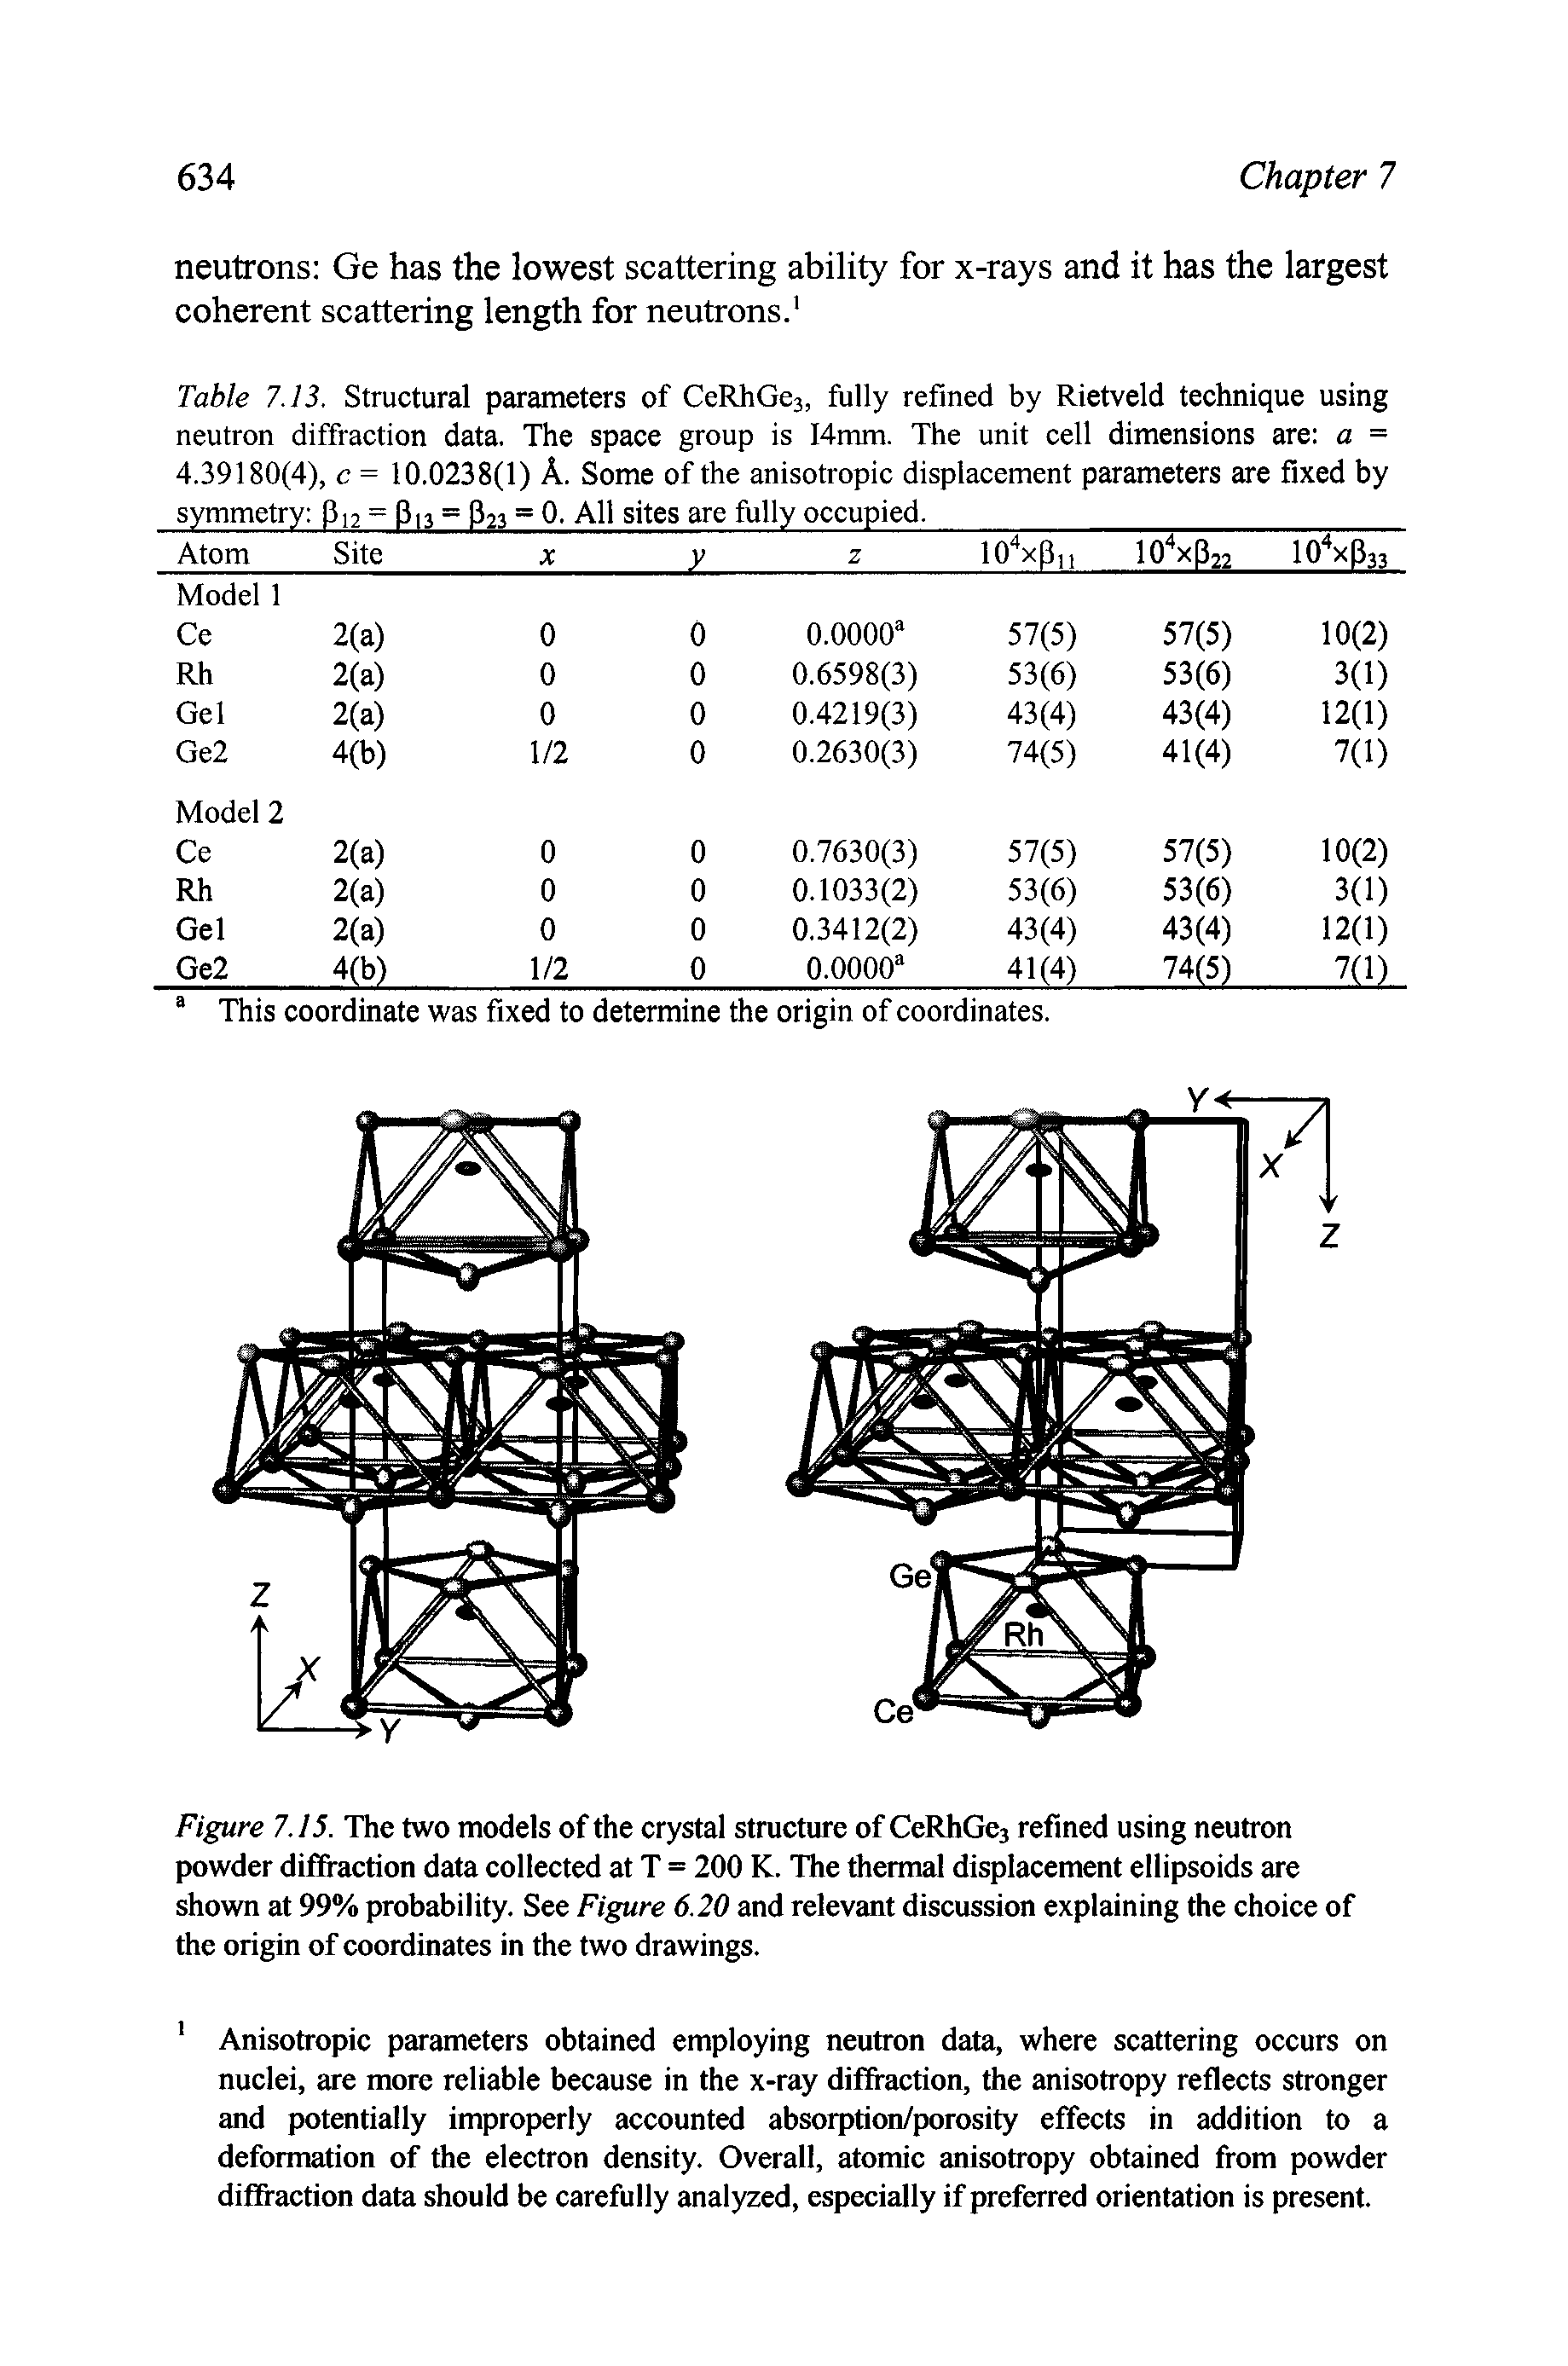 Table 7.13. Structural parameters of CeRhGes, fully refined by Rietveld teehnique using neutron diffraction data. The space group is I4mm. The unit cell dimensions are a = 4.39180(4), c = 10.0238(1) A. Some of the anisotropic displacement parameters are fixed by...